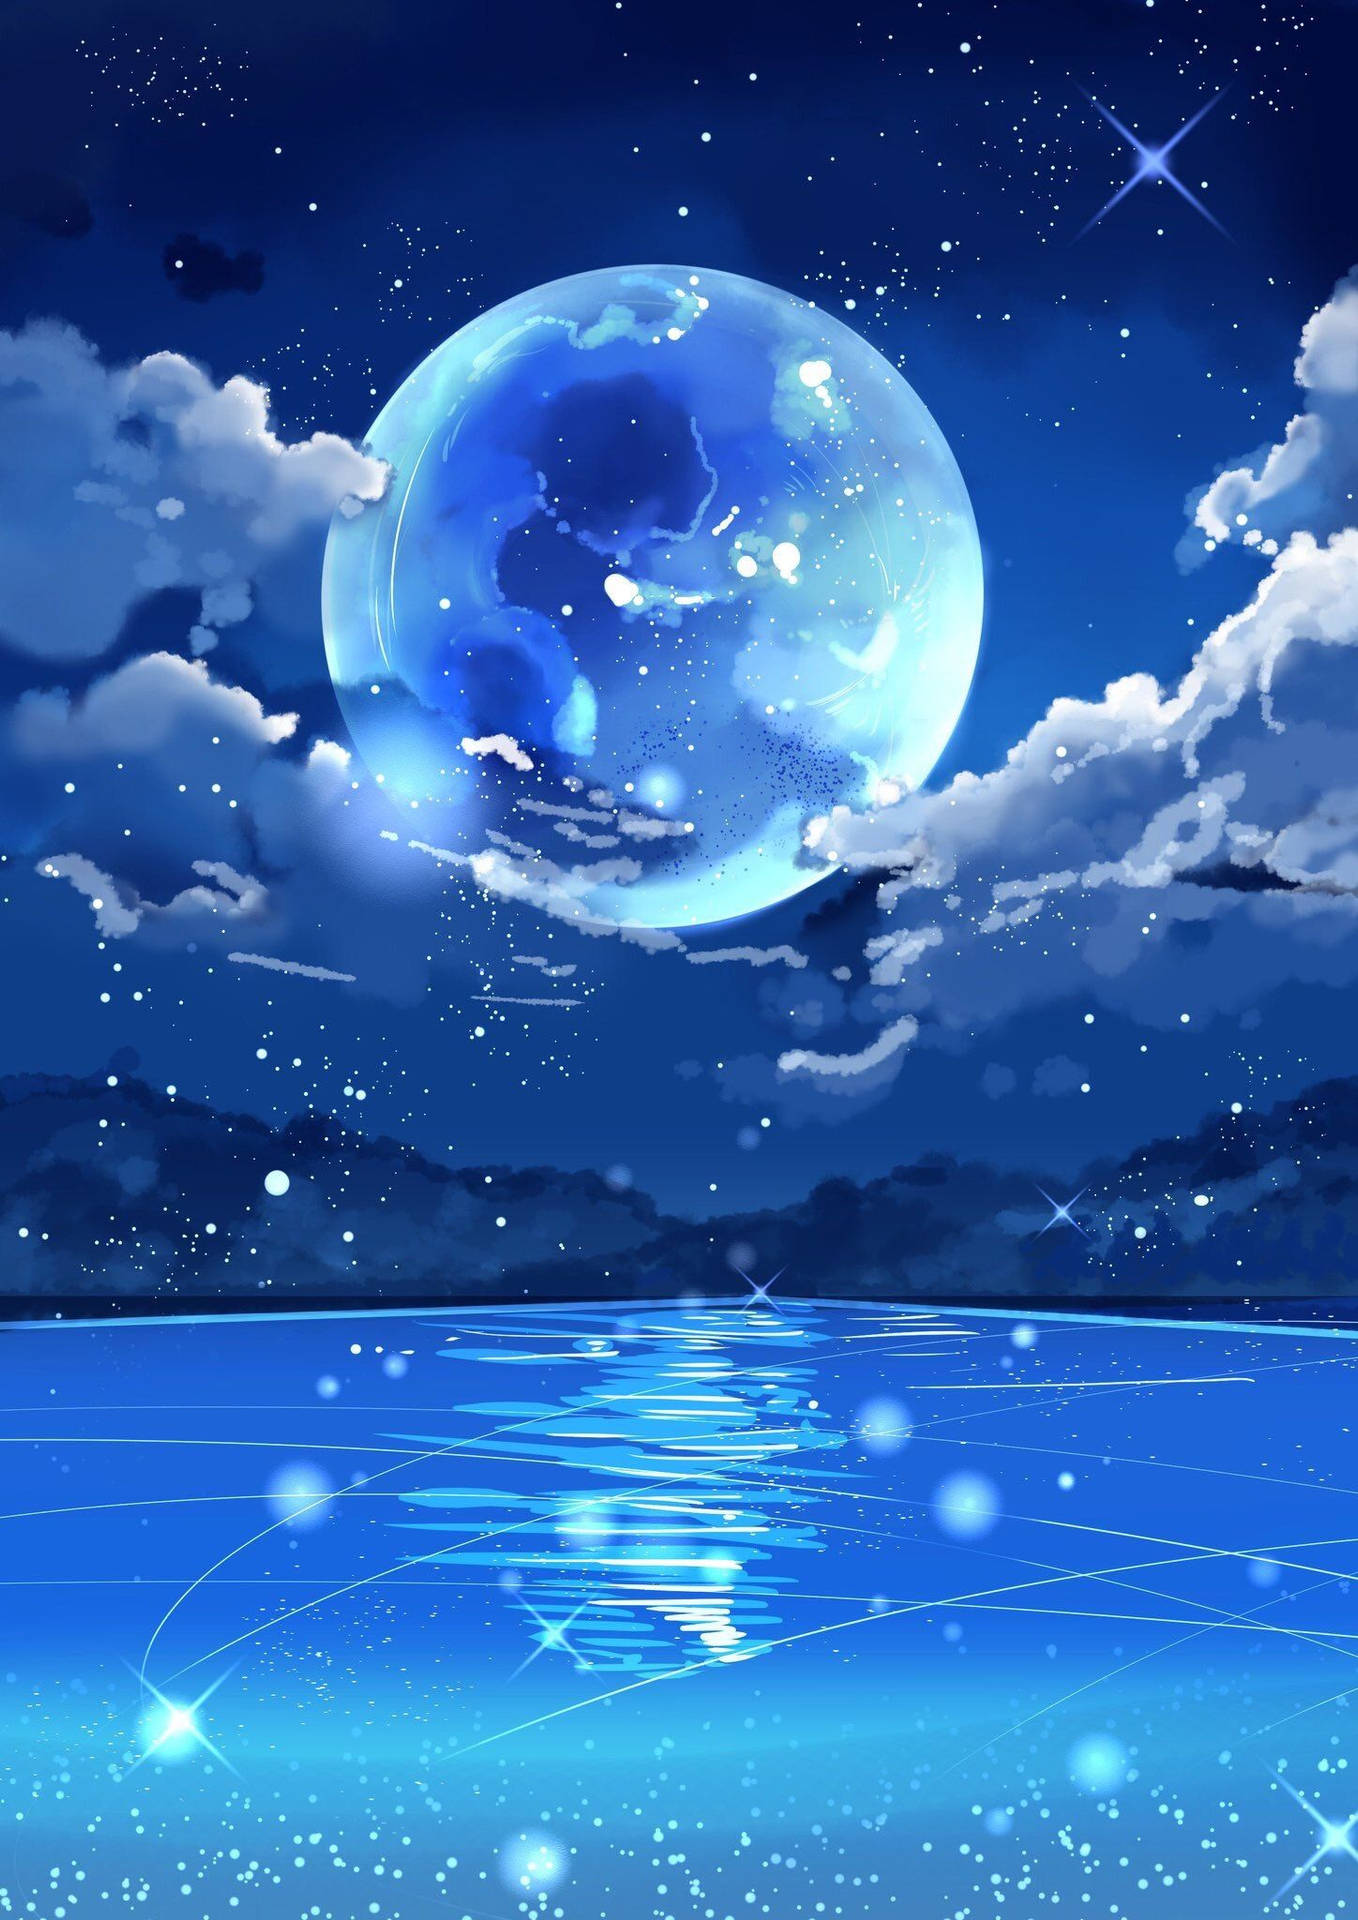 Galaxy Moon Clouds And Ocean Background